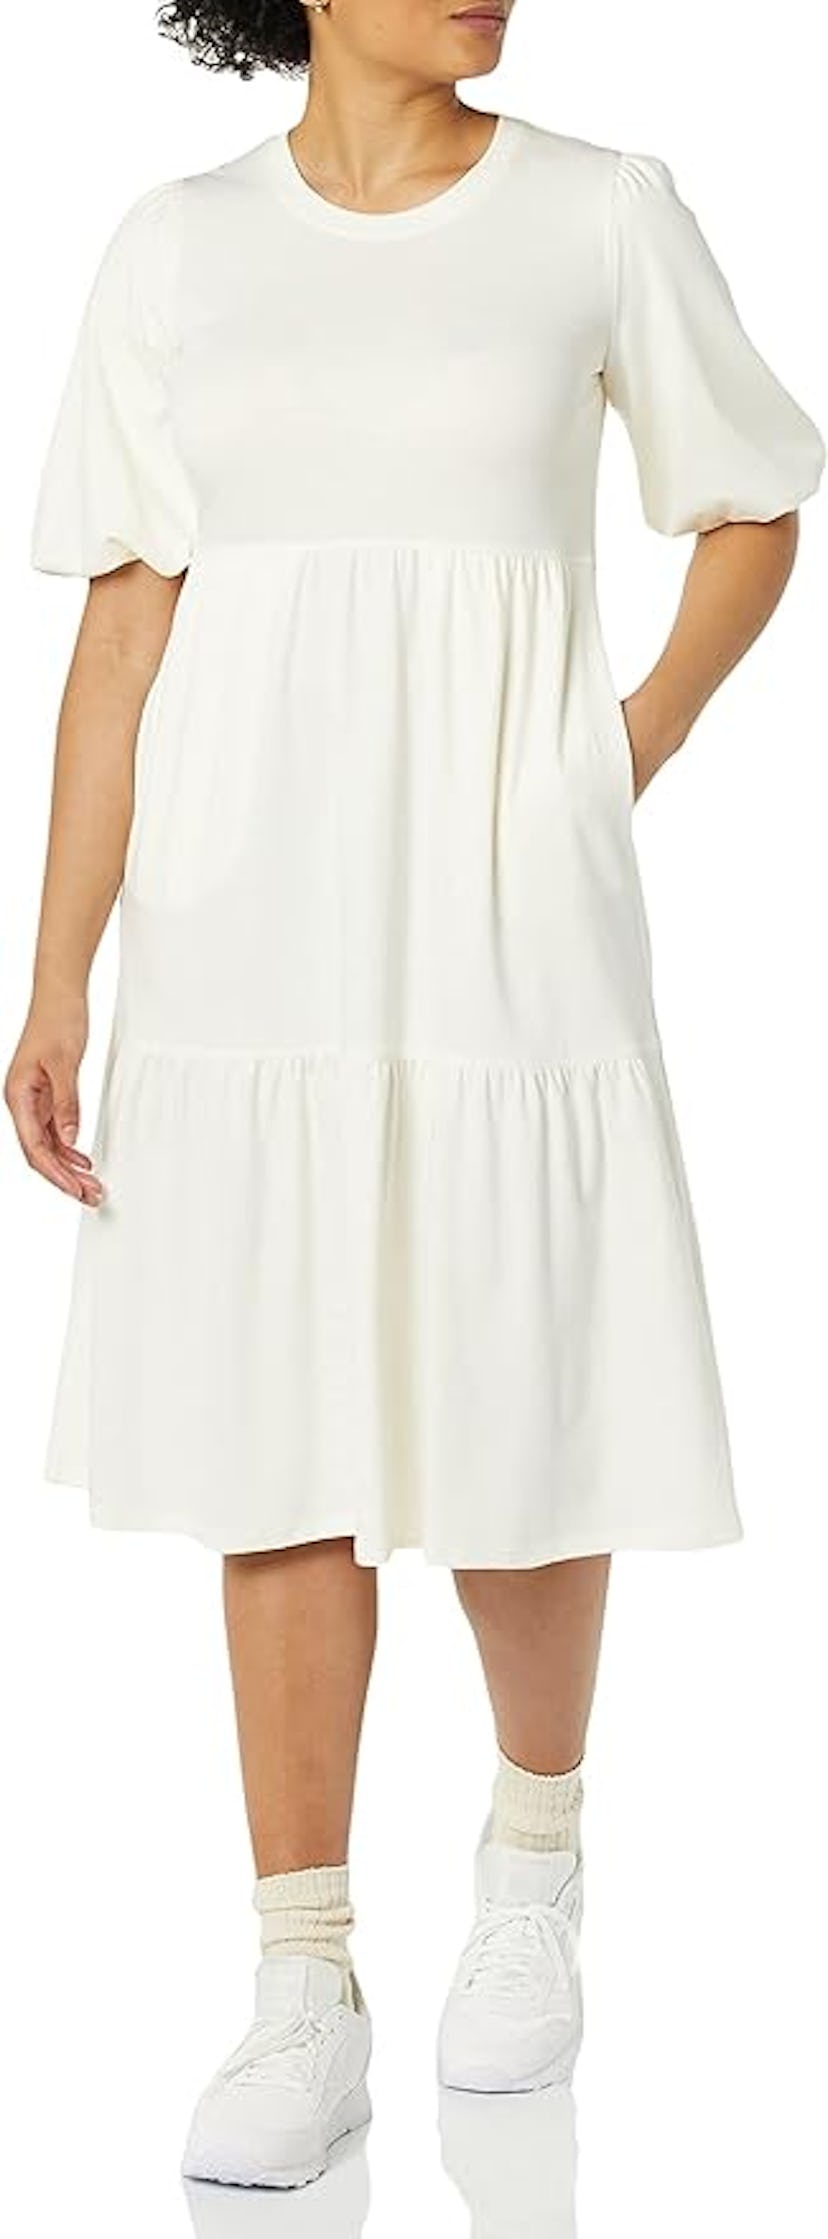 Amazon Essentials Organic Cotton Fit and Flare Dress